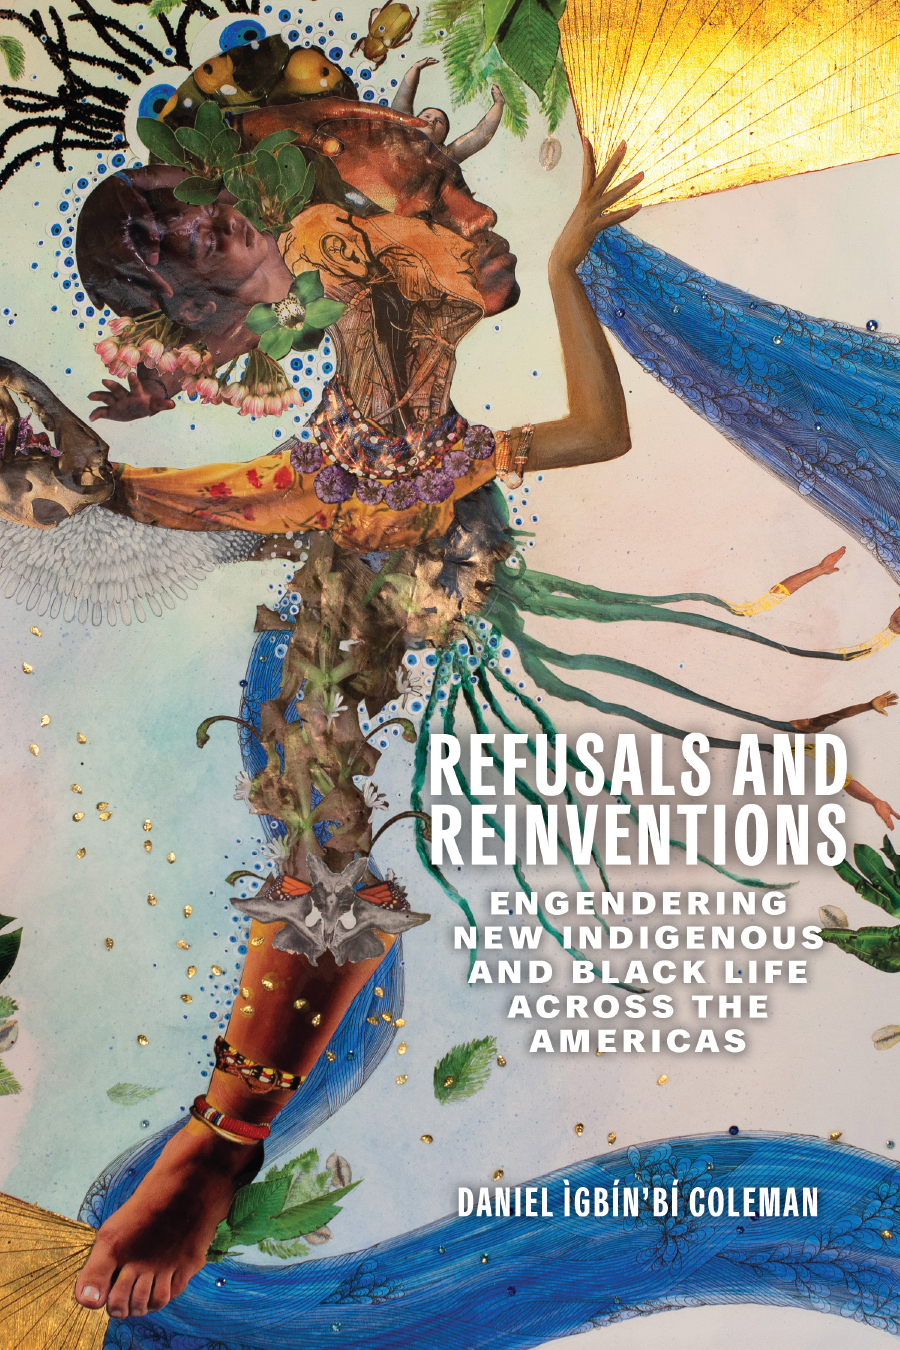 Front cover of Refusals and Reinventions: Engendering New Indigenous and Black Life across the Americas, by Daniel Ewín’bí Coleman, featuring a fantastical image of a non-white person with faces of different genders and attitudes, a body made of marine and plant life, with sun rays and water waves emerging from the hand above and the foot below.